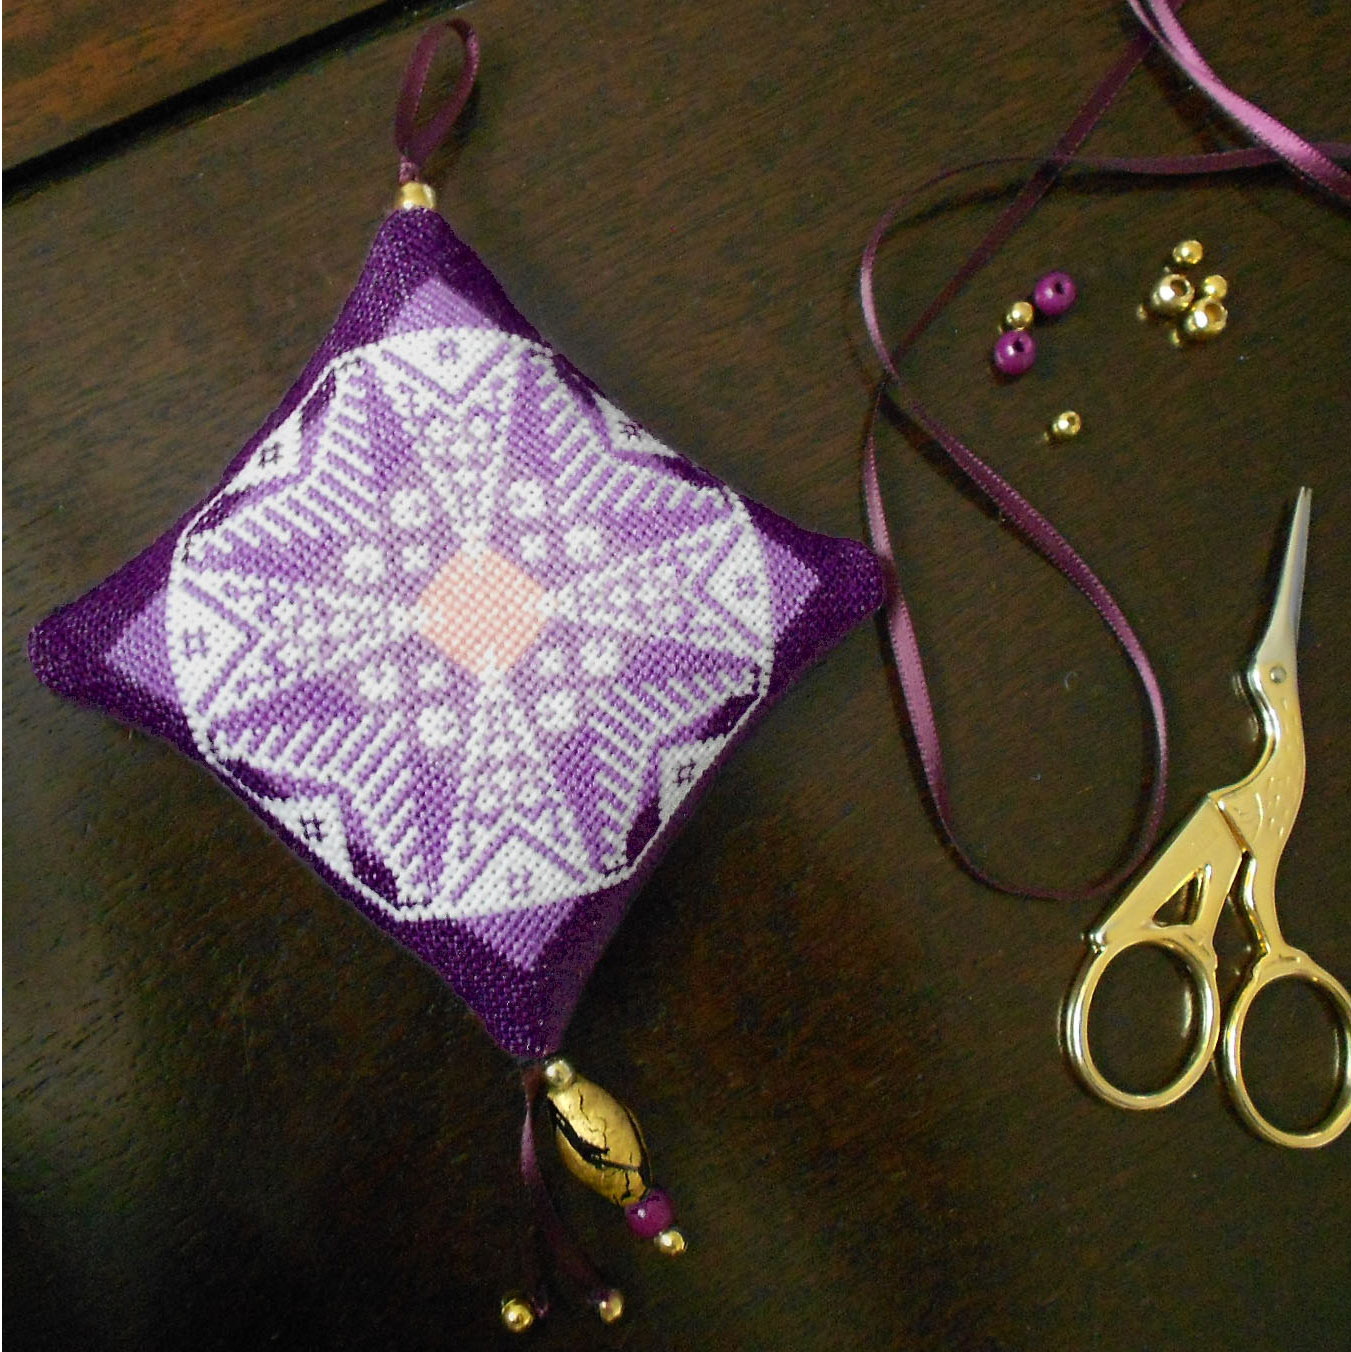 Jewel-like Finishing Tutorial for stitched Ornaments